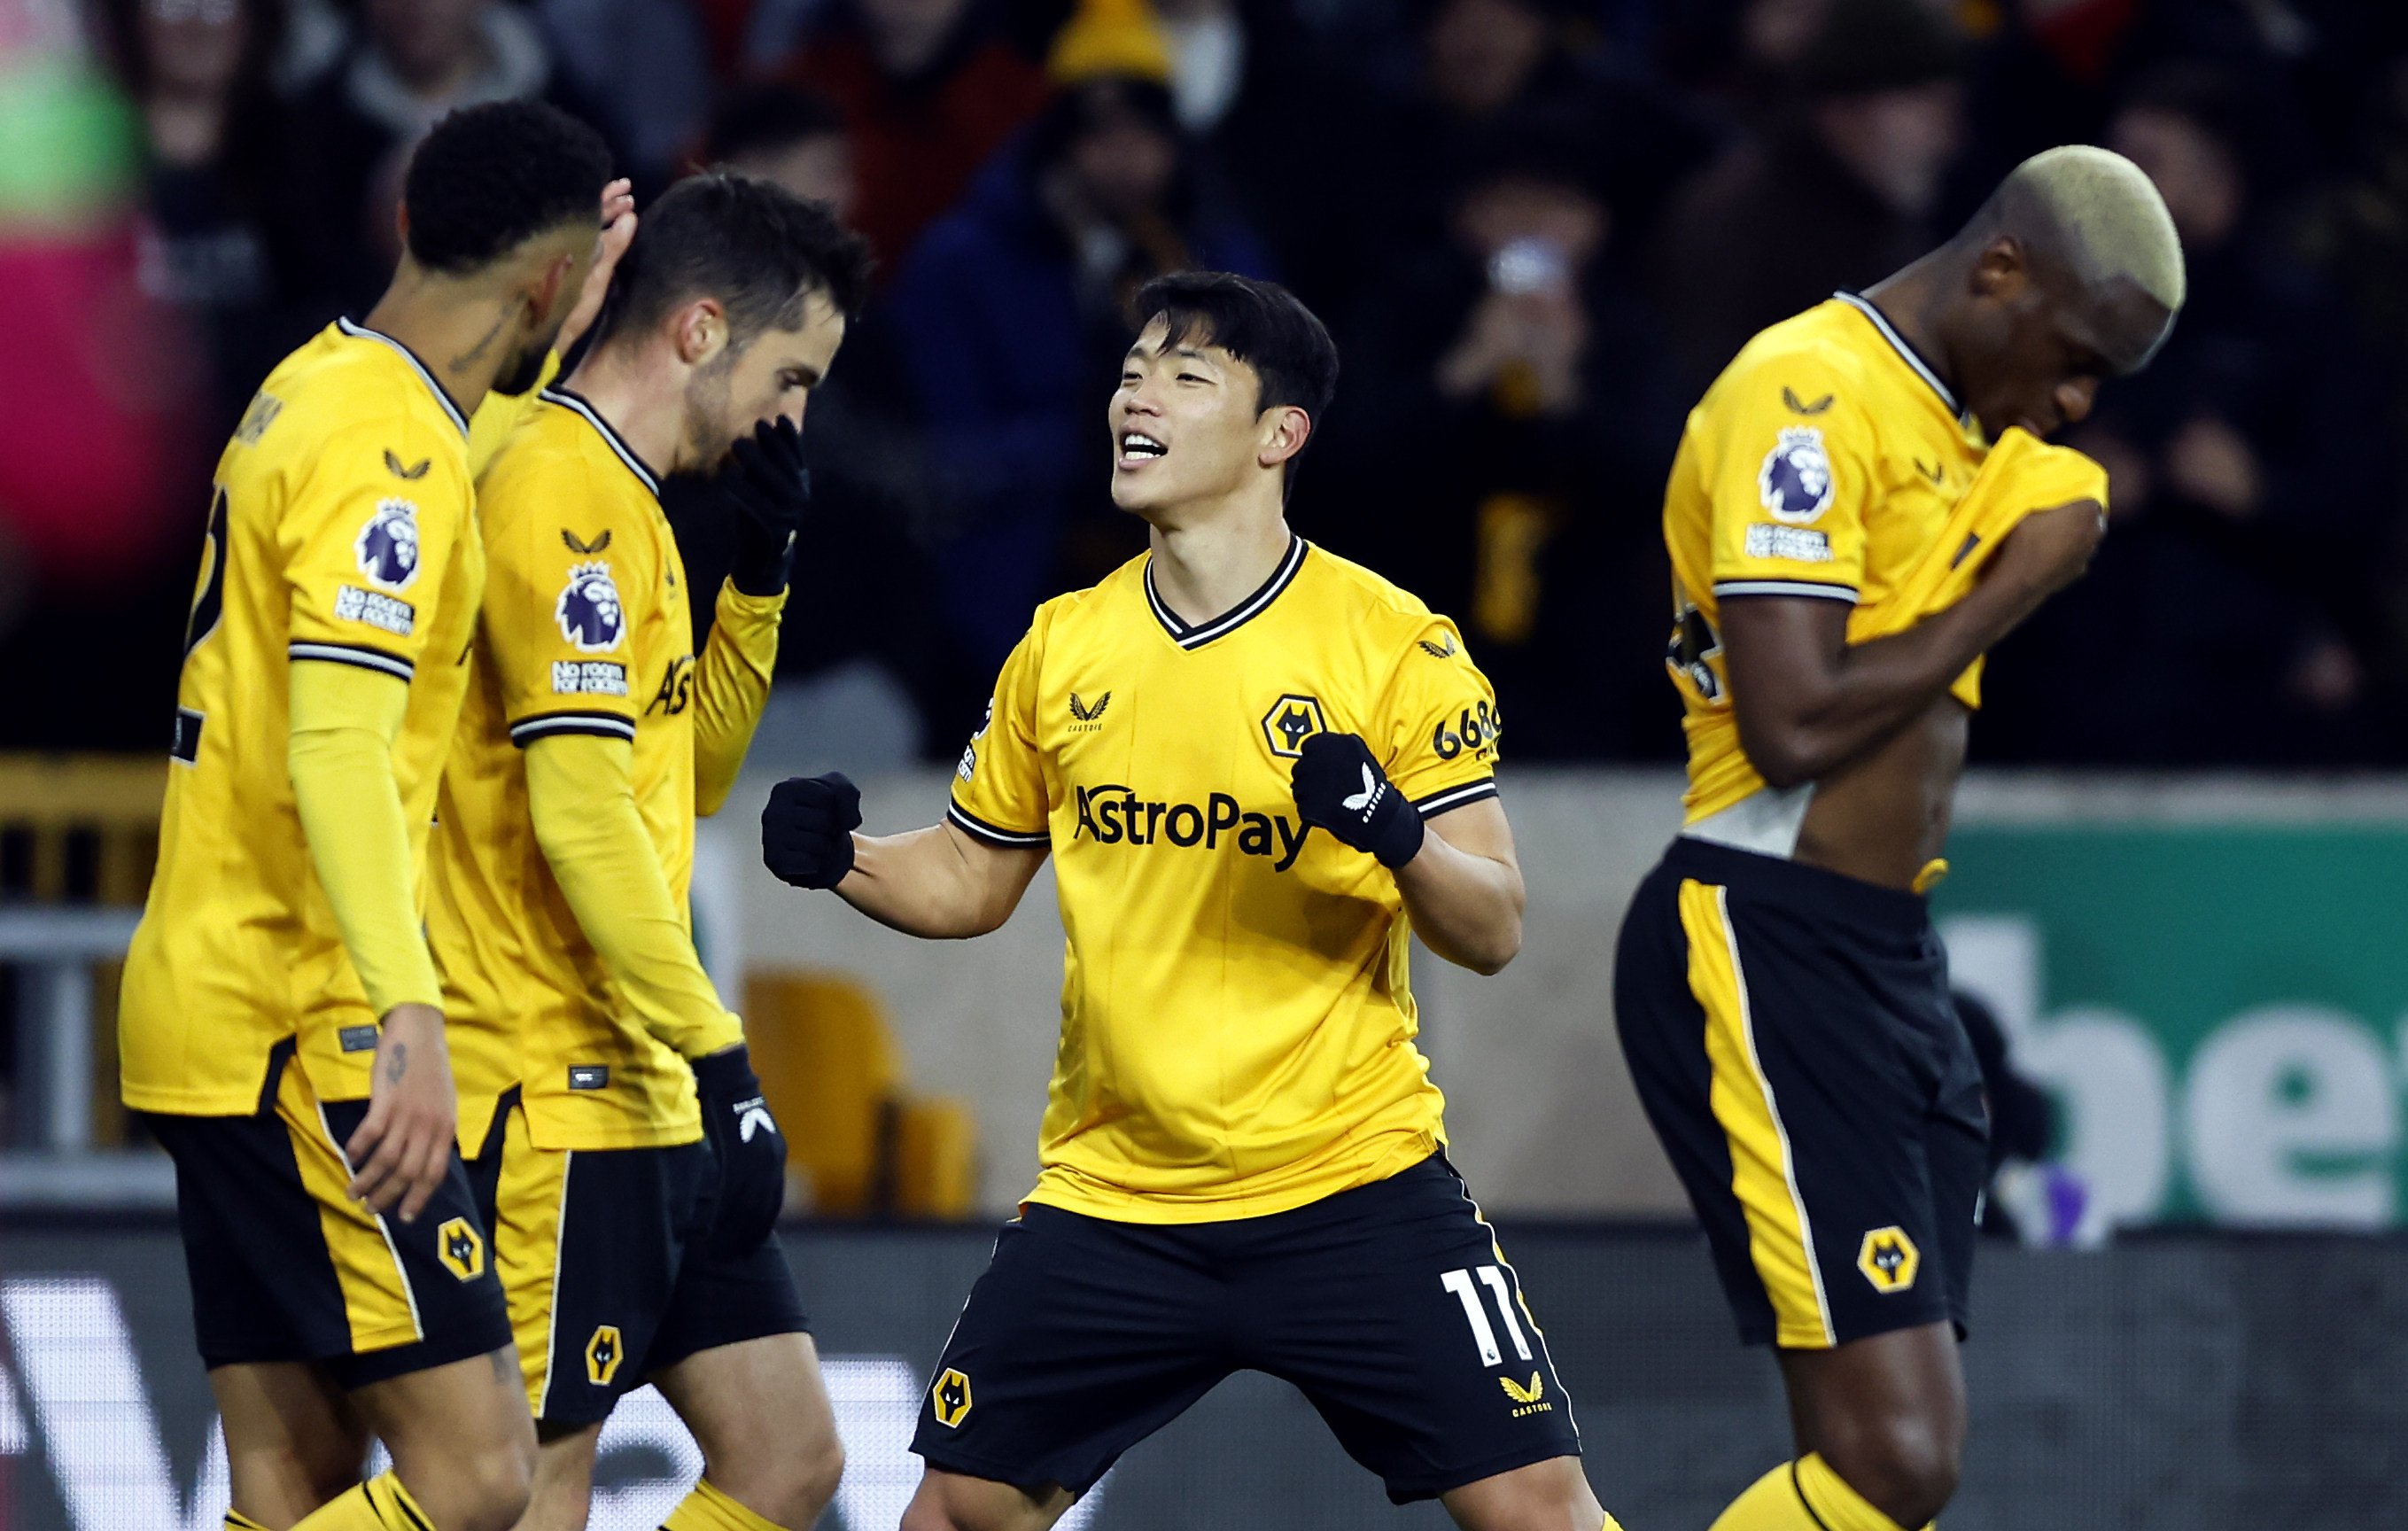 Hwang Hee-Chan celebrates scoring for Wolves at home to Burnley. Photo: dpa